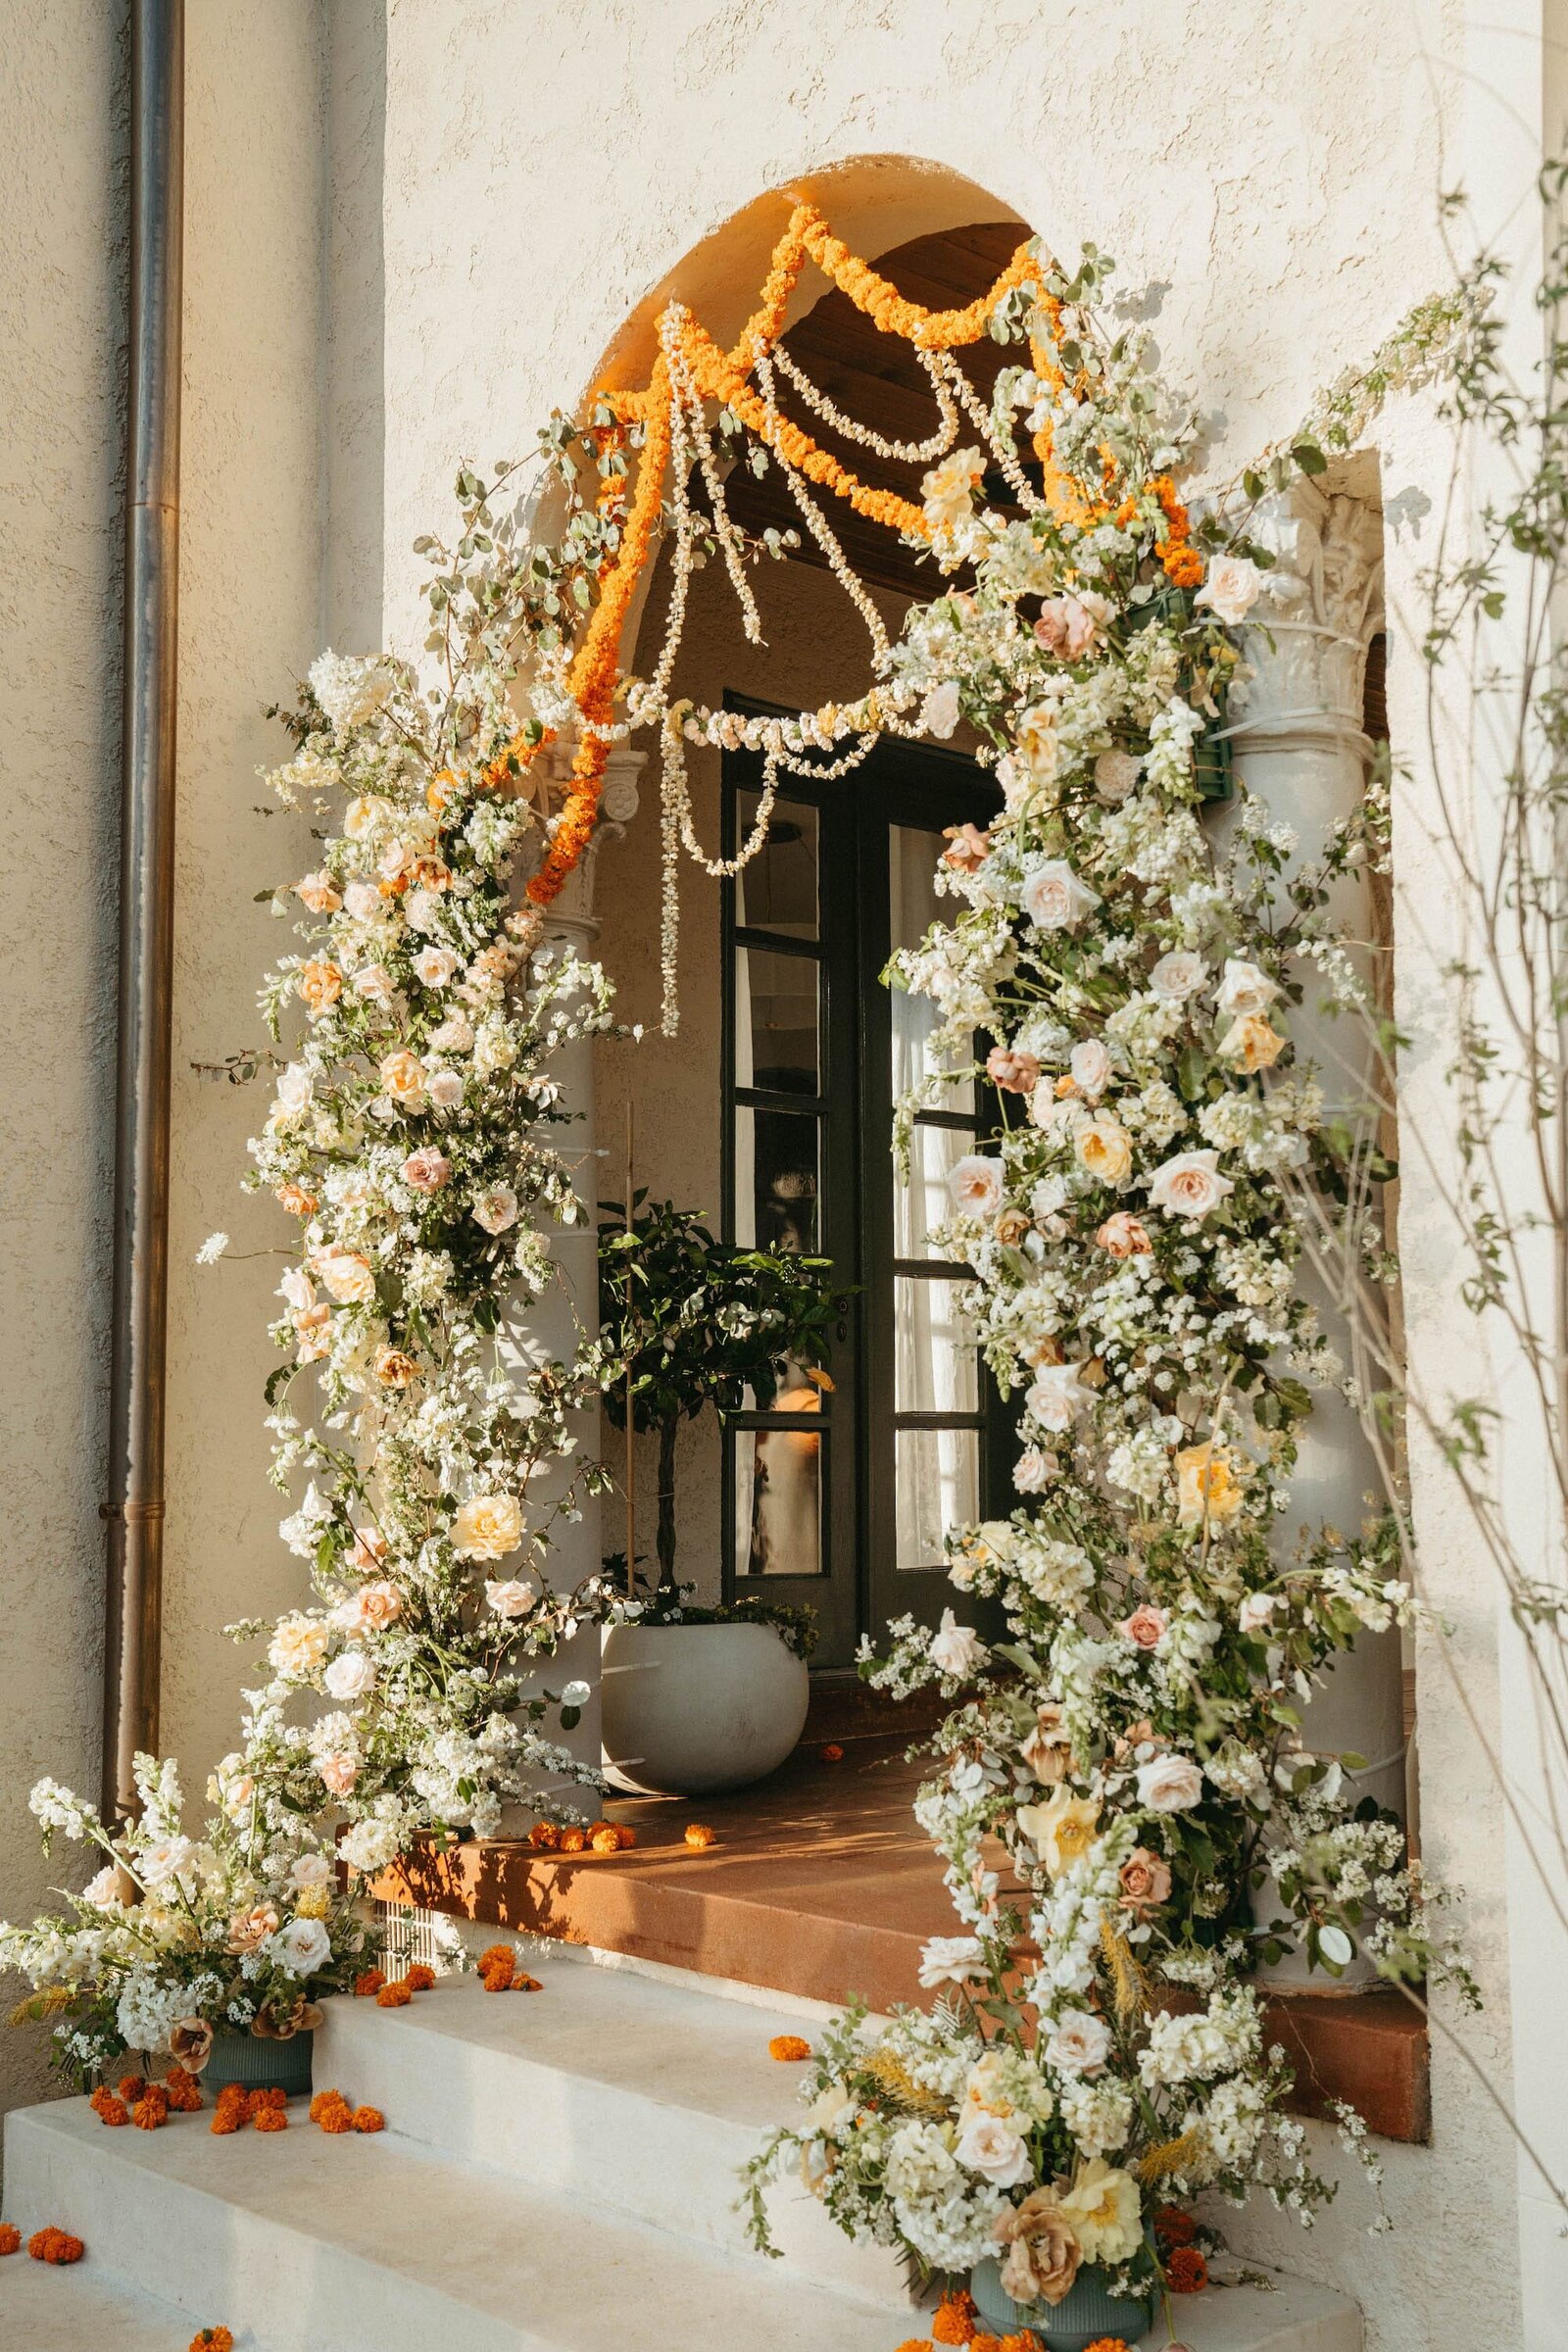 A large floral installation featuring white and orange in an archway with stairs,